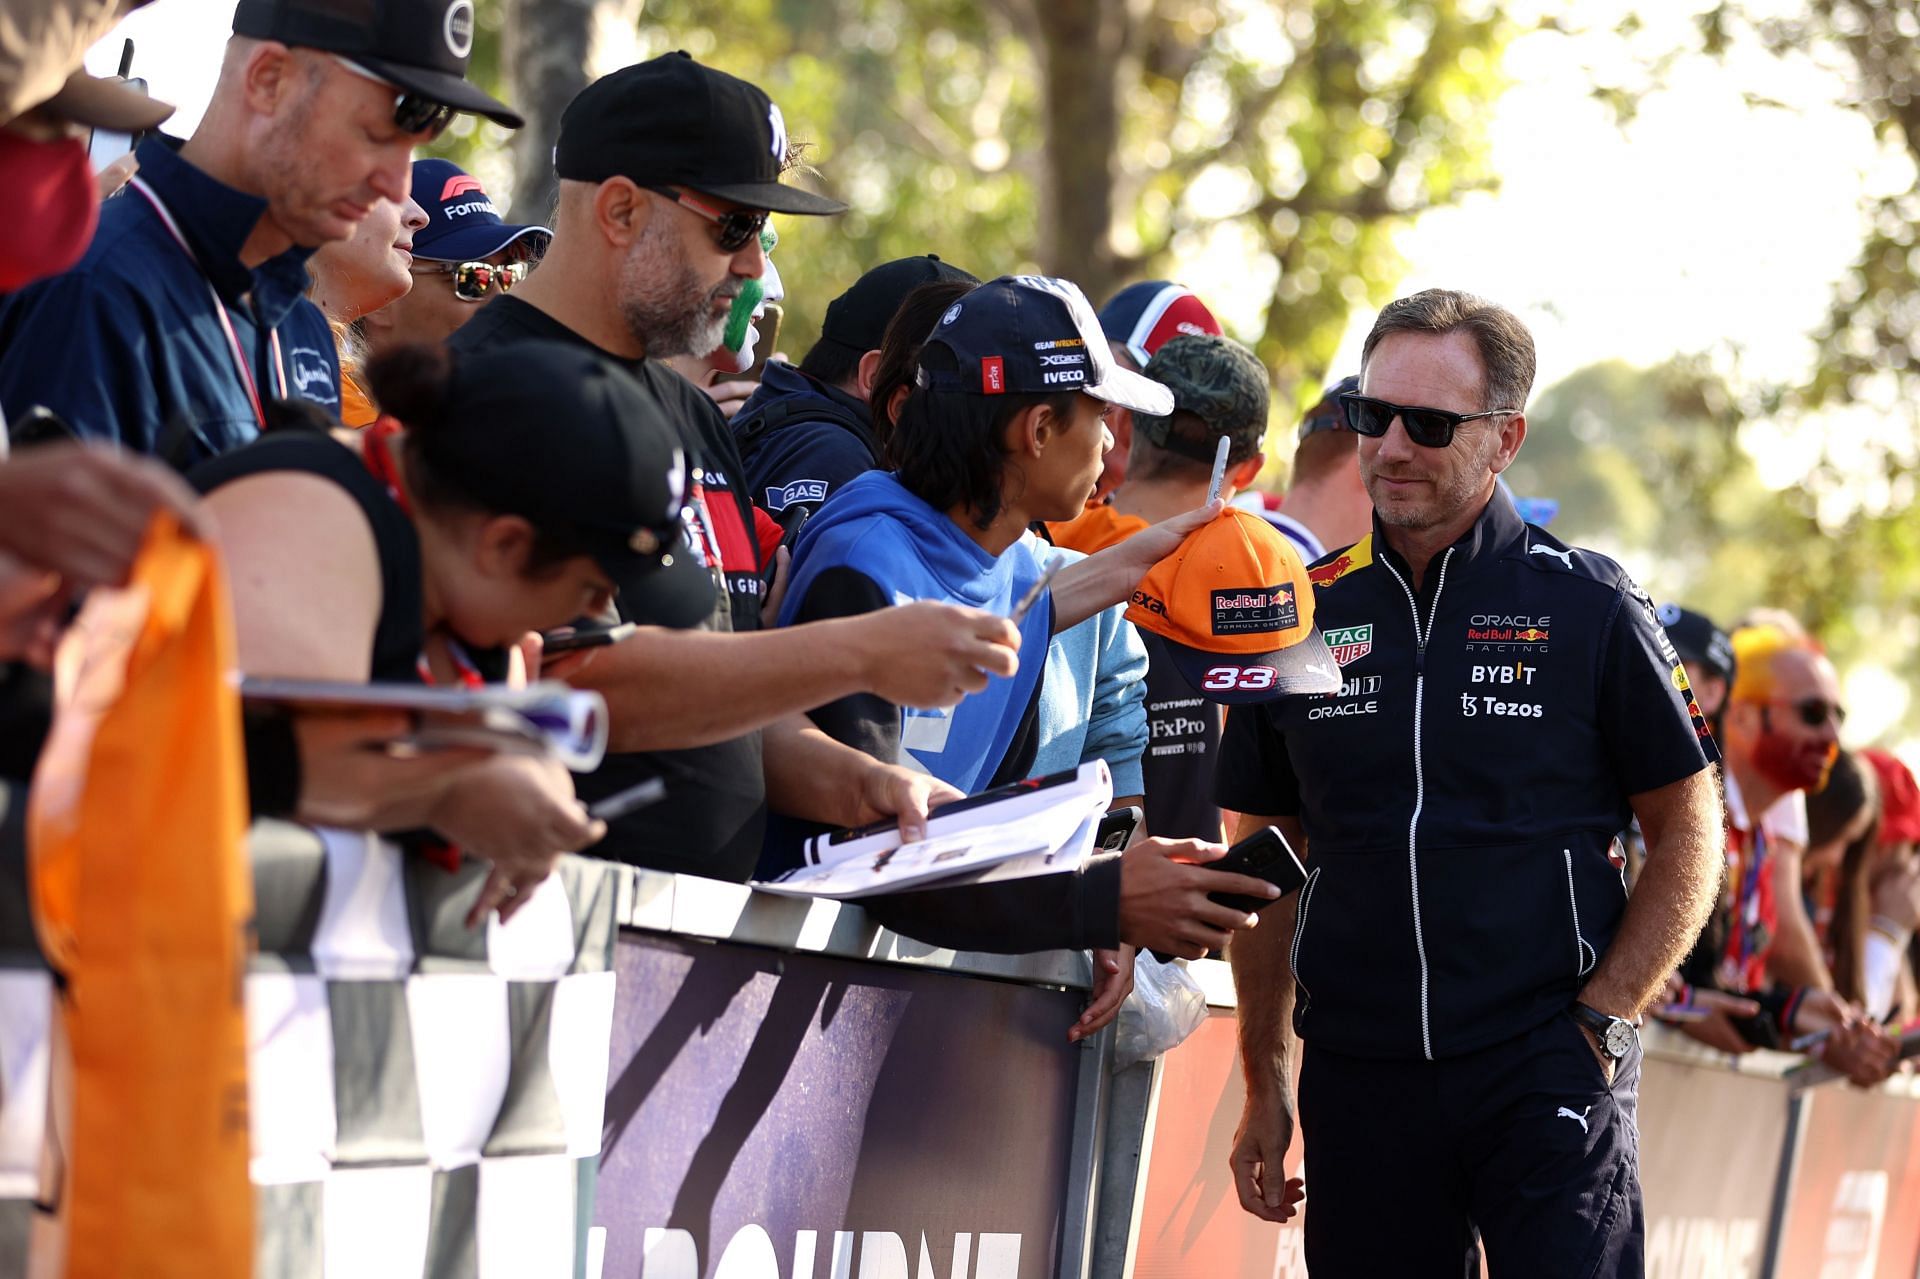 Red Bull Racing Team Principal Christian Horner arrives at the circuit and poses for photos with fans prior to practice ahead of the F1 Grand Prix of Australia at Melbourne Grand Prix Circuit on April 08, 2022 in Melbourne, Australia. (Photo by Robert Cianflone/Getty Images)